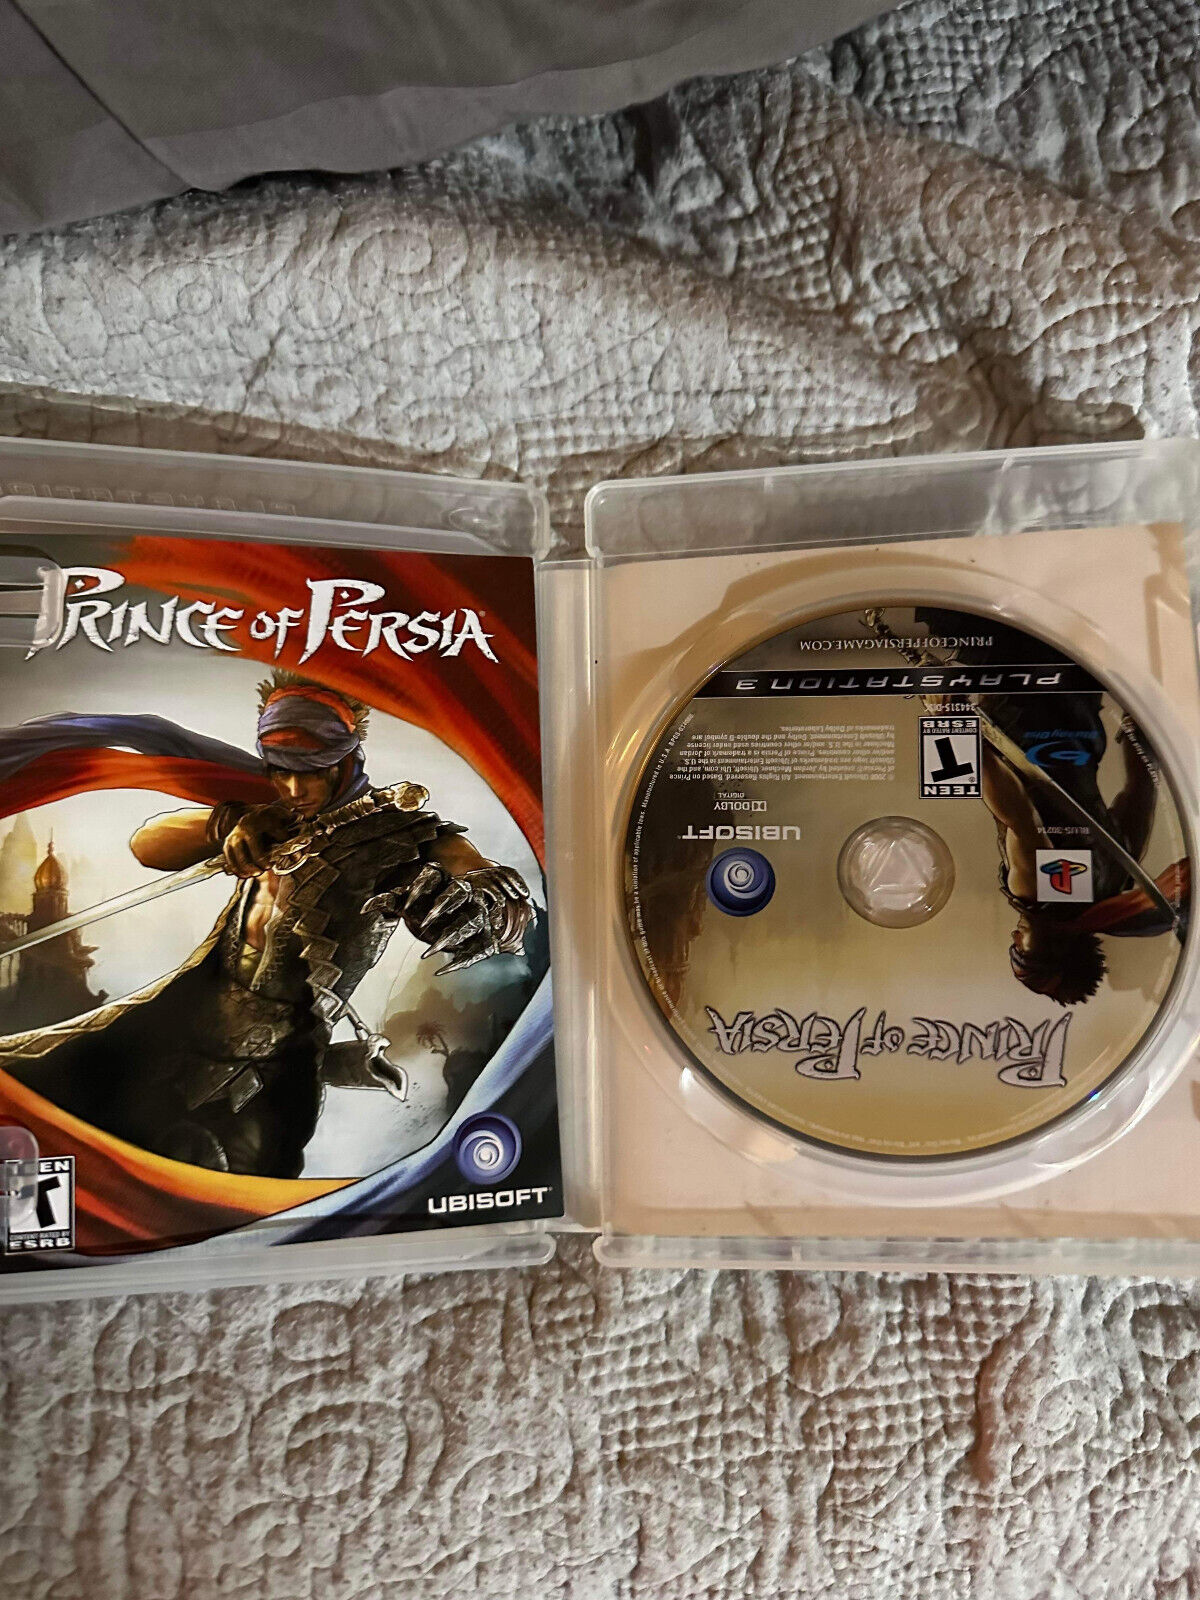 Prince of Persia (Sony PlayStation 3, 2008) PS3